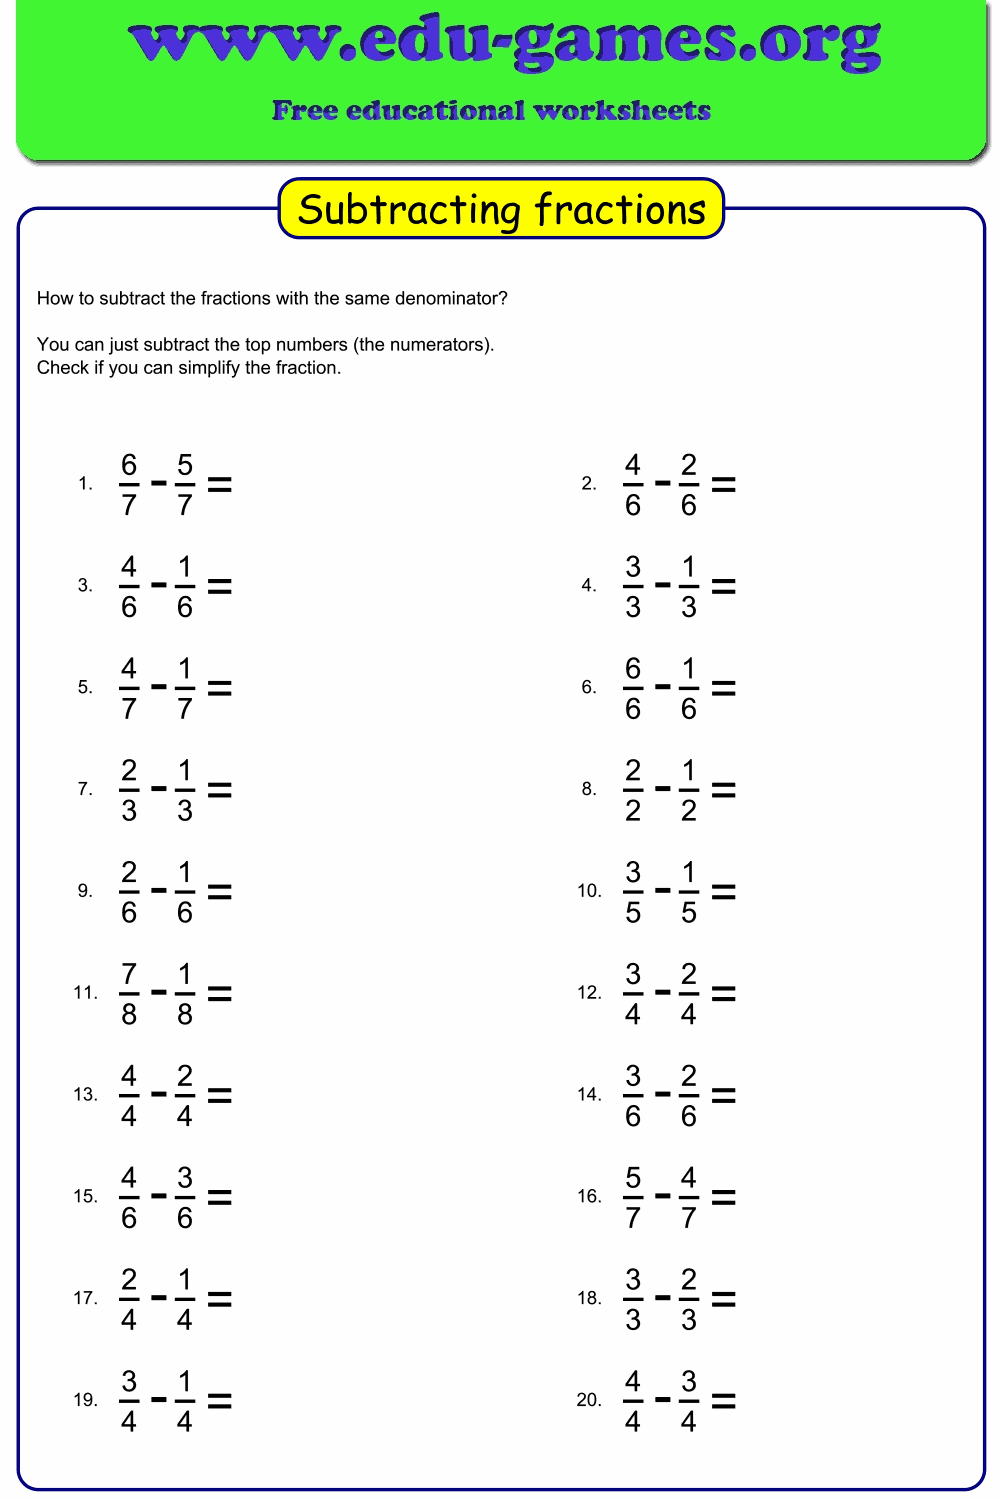 subtracting-fractions-png